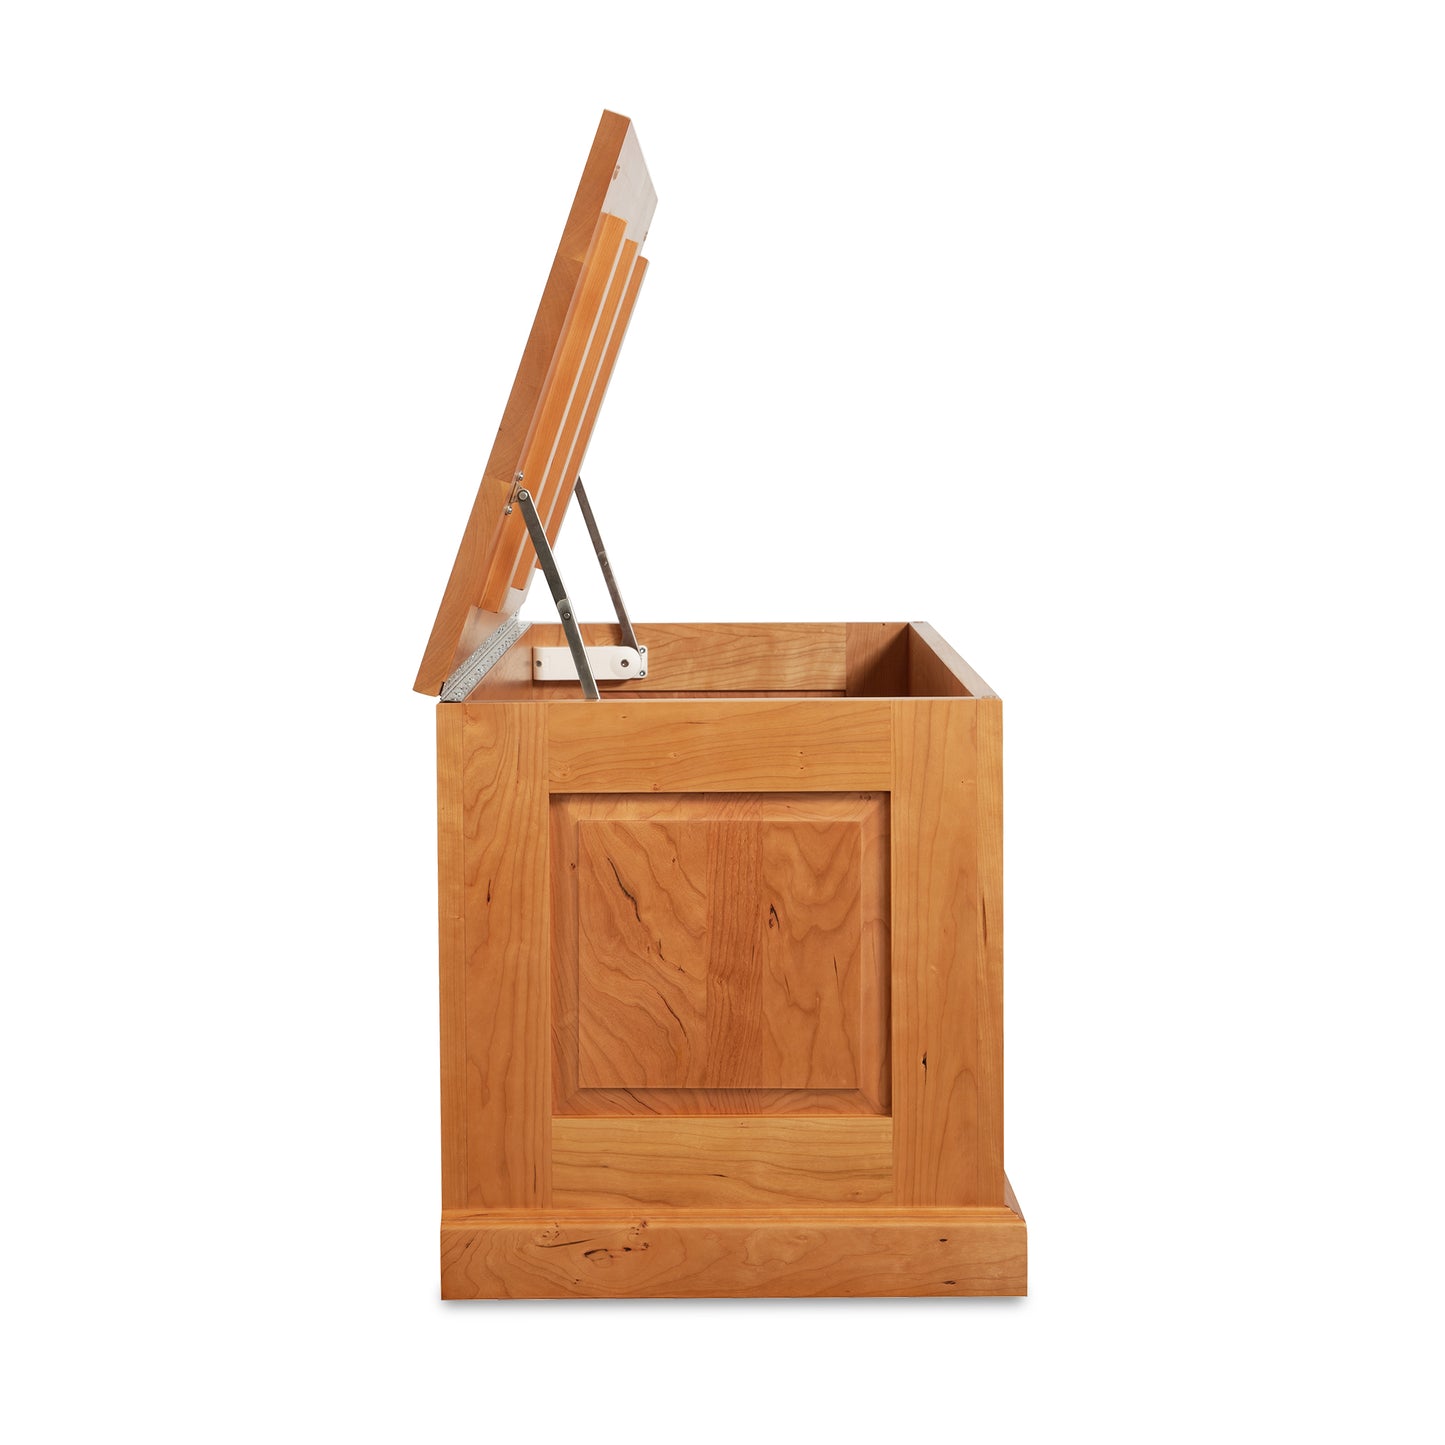 A sustainably harvested, New England Shaker Blanket Box by Lyndon Furniture.